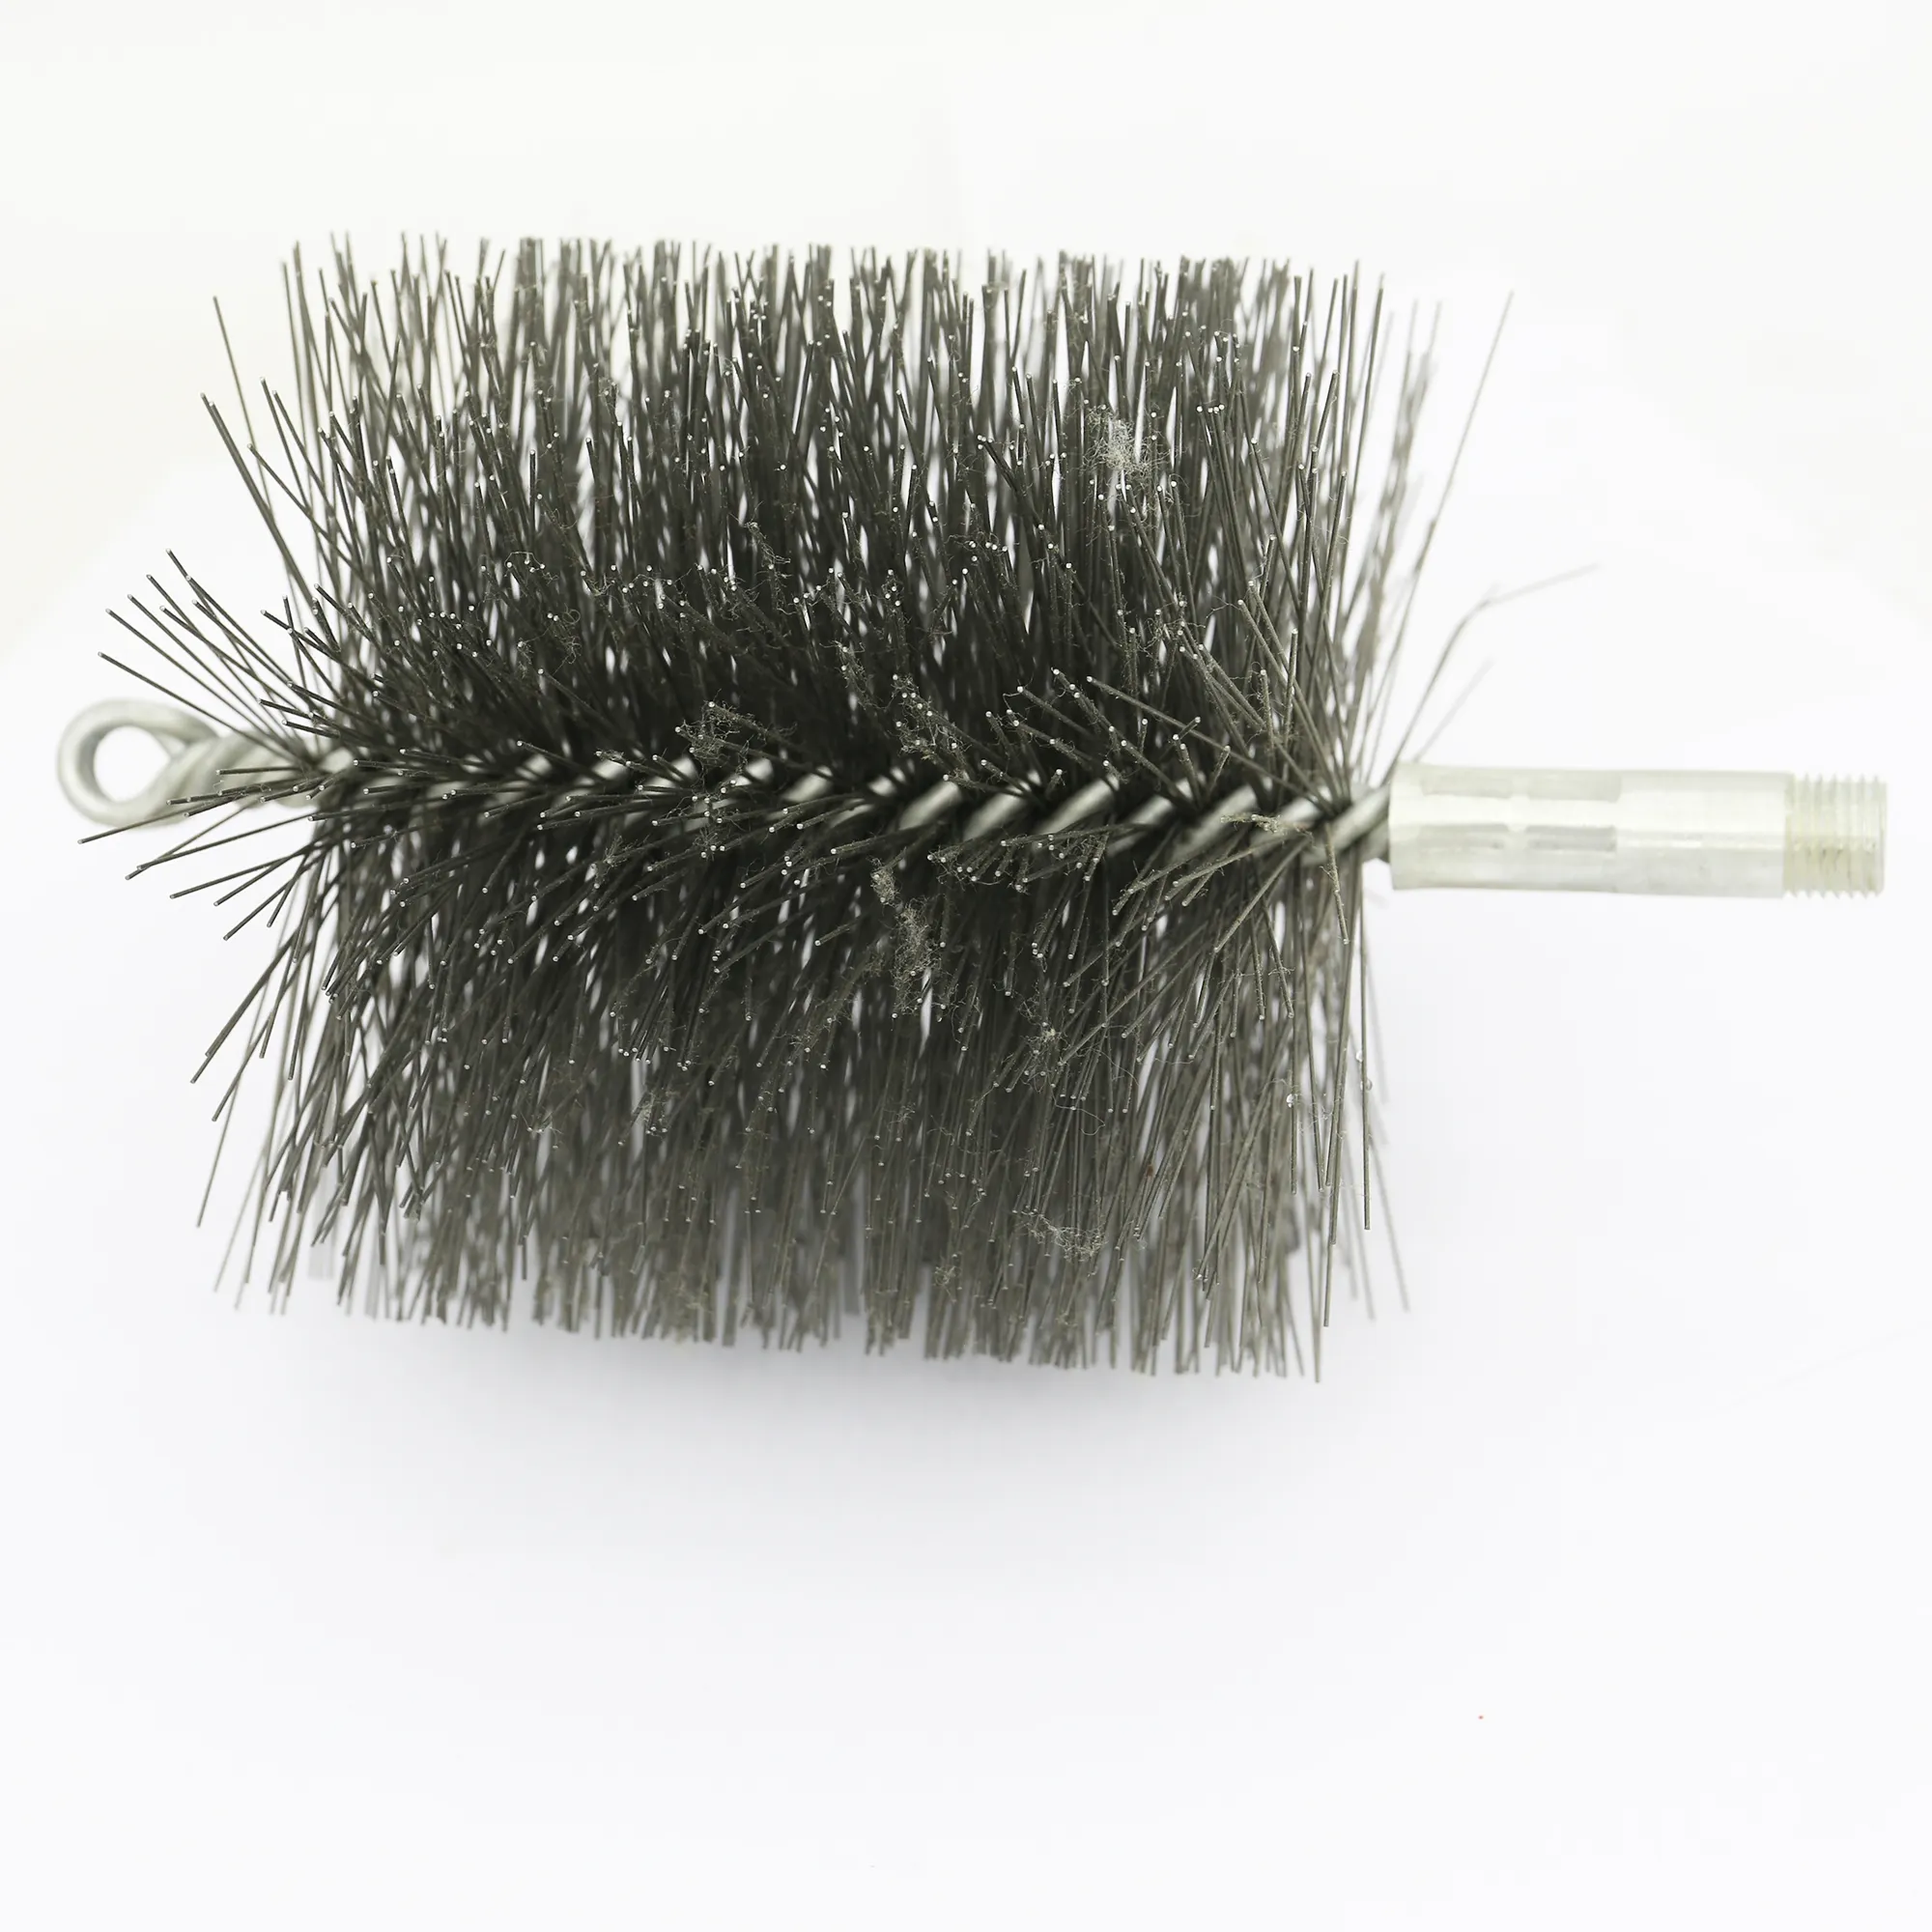 Industrial Twisted Double Spiral Wire Chimney Flue Boiler Tube Vent Brushes Cleaning Sweeping Removing Soot Rust